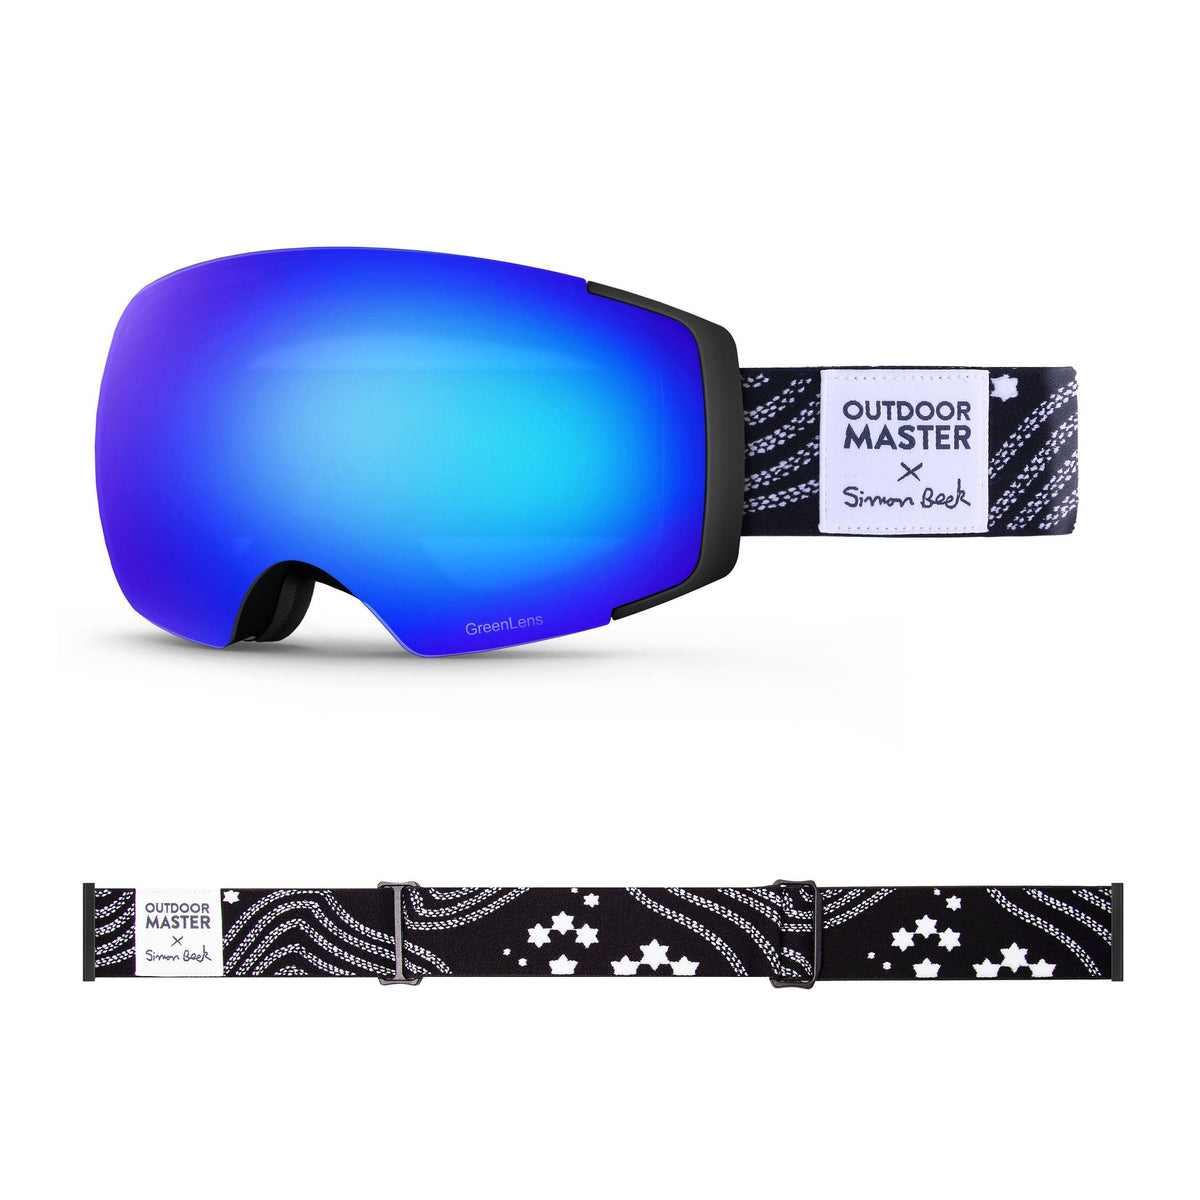 OutdoorMaster x Simon Beck Ski Goggles Pro Series - Snowshoeing Art Limited Edition OutdoorMaster GreenLens VLT 15% TAC Grey with REVO Blue Polarized Star Road-Black